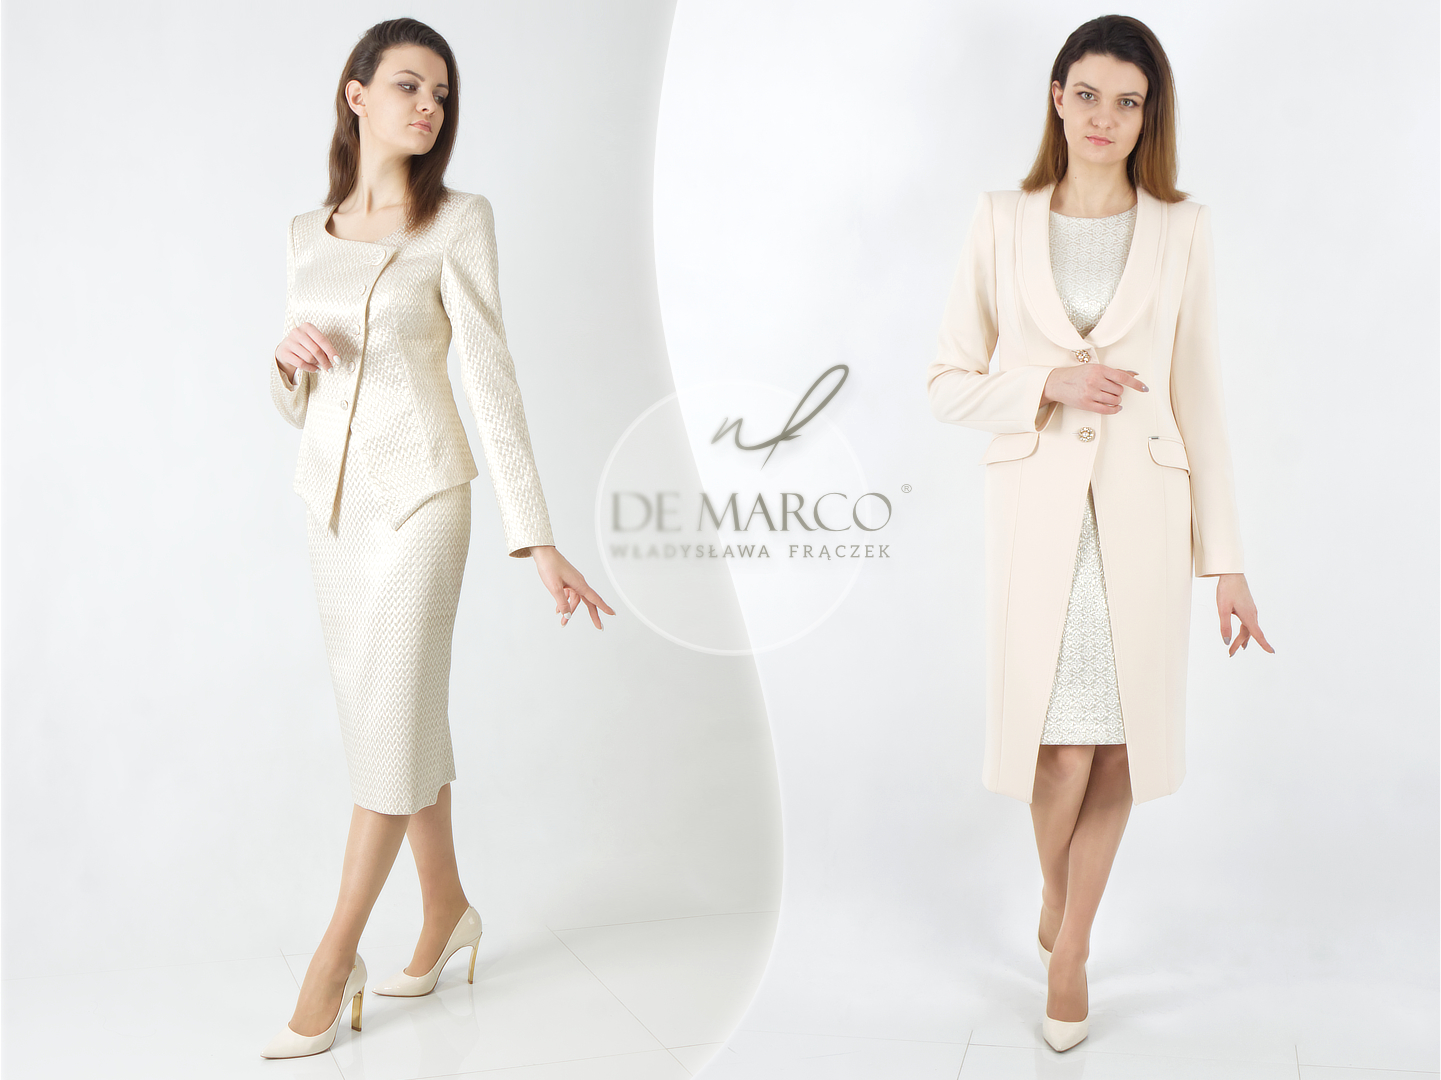 Exclusive dresses and suits for mother and mother-in-law weddings